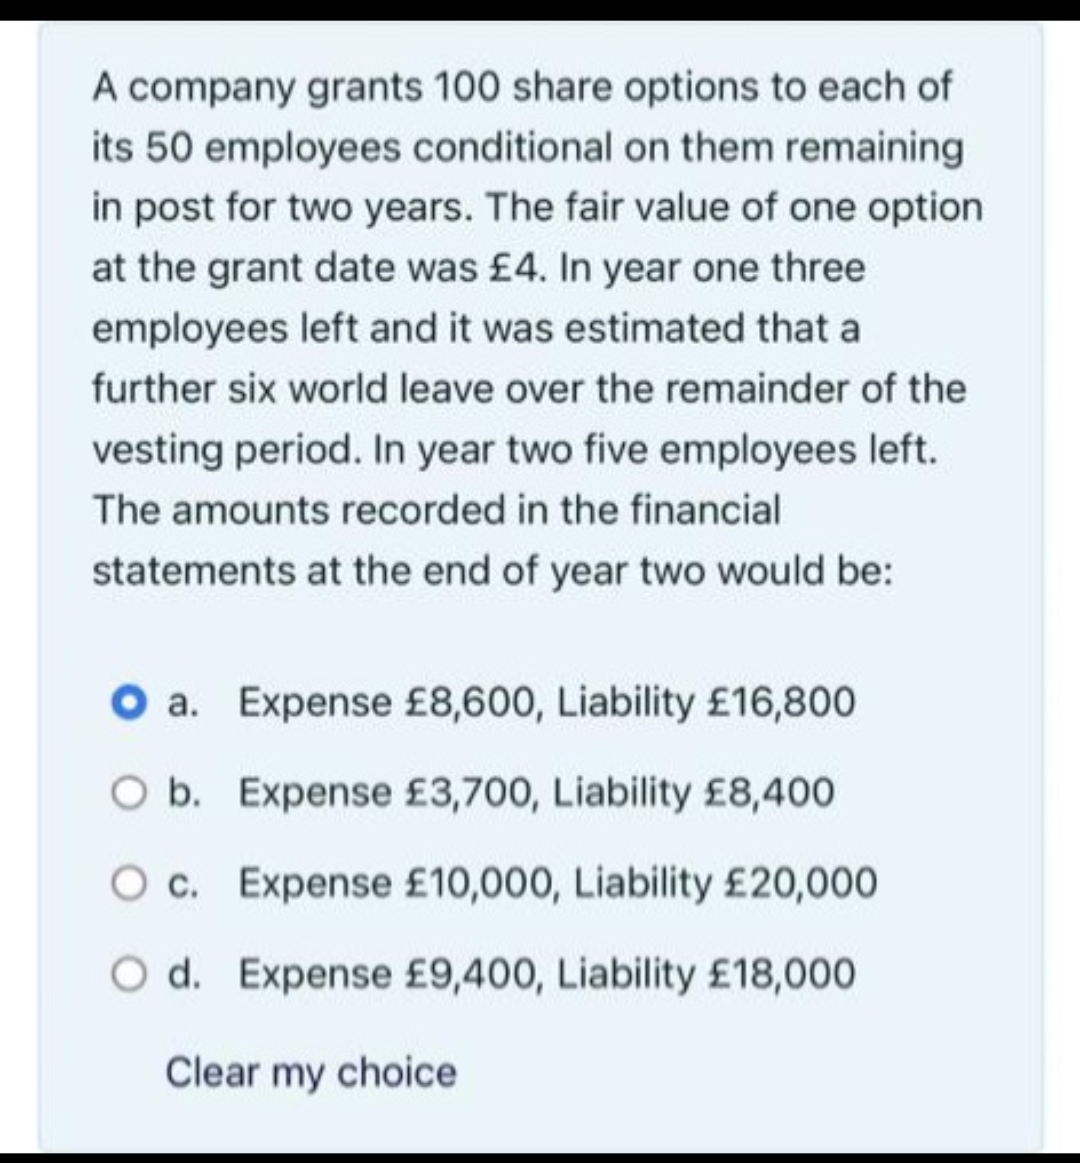 A company grants 100 share options to each of
its 50 employees conditional on them remaining
in post for two years. The fair value of one option
at the grant date was £4. In year one three
employees left and it was estimated that a
further six world leave over the remainder of the
vesting period. In year two five employees left.
The amounts recorded in the financial
statements at the end of year two would be:
O a. Expense £8,600, Liability £16,800
O b.
Expense £3,700, Liability £8,400
O c.
Expense £10,000, Liability £20,000
O d. Expense £9,400, Liability £18,000
Clear my choice